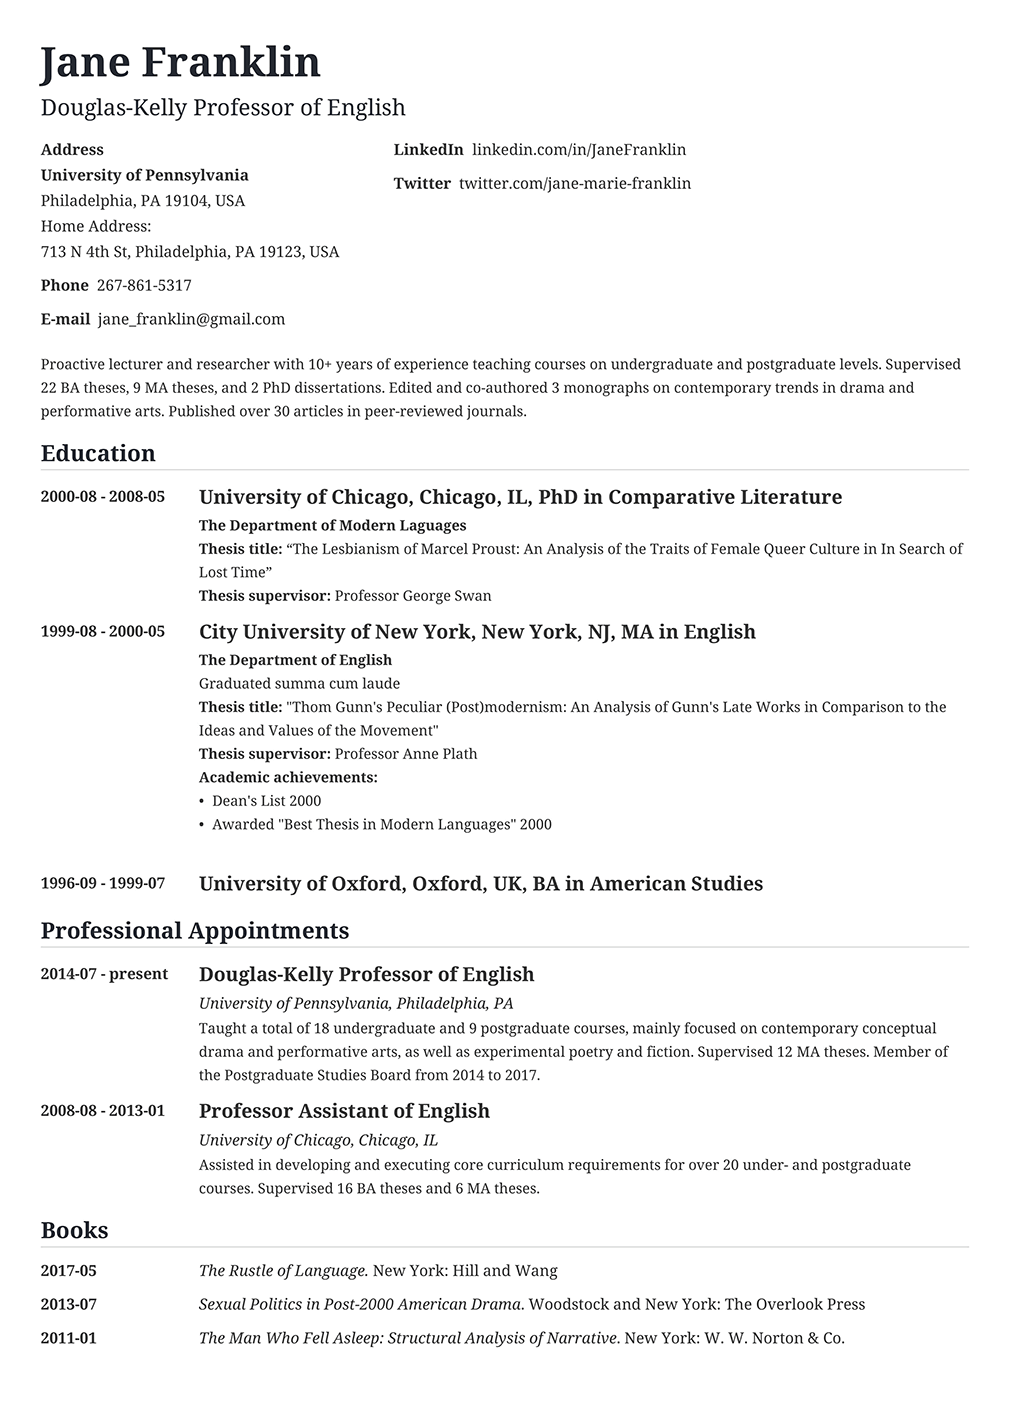 Writing a cv for academic positions cleaning